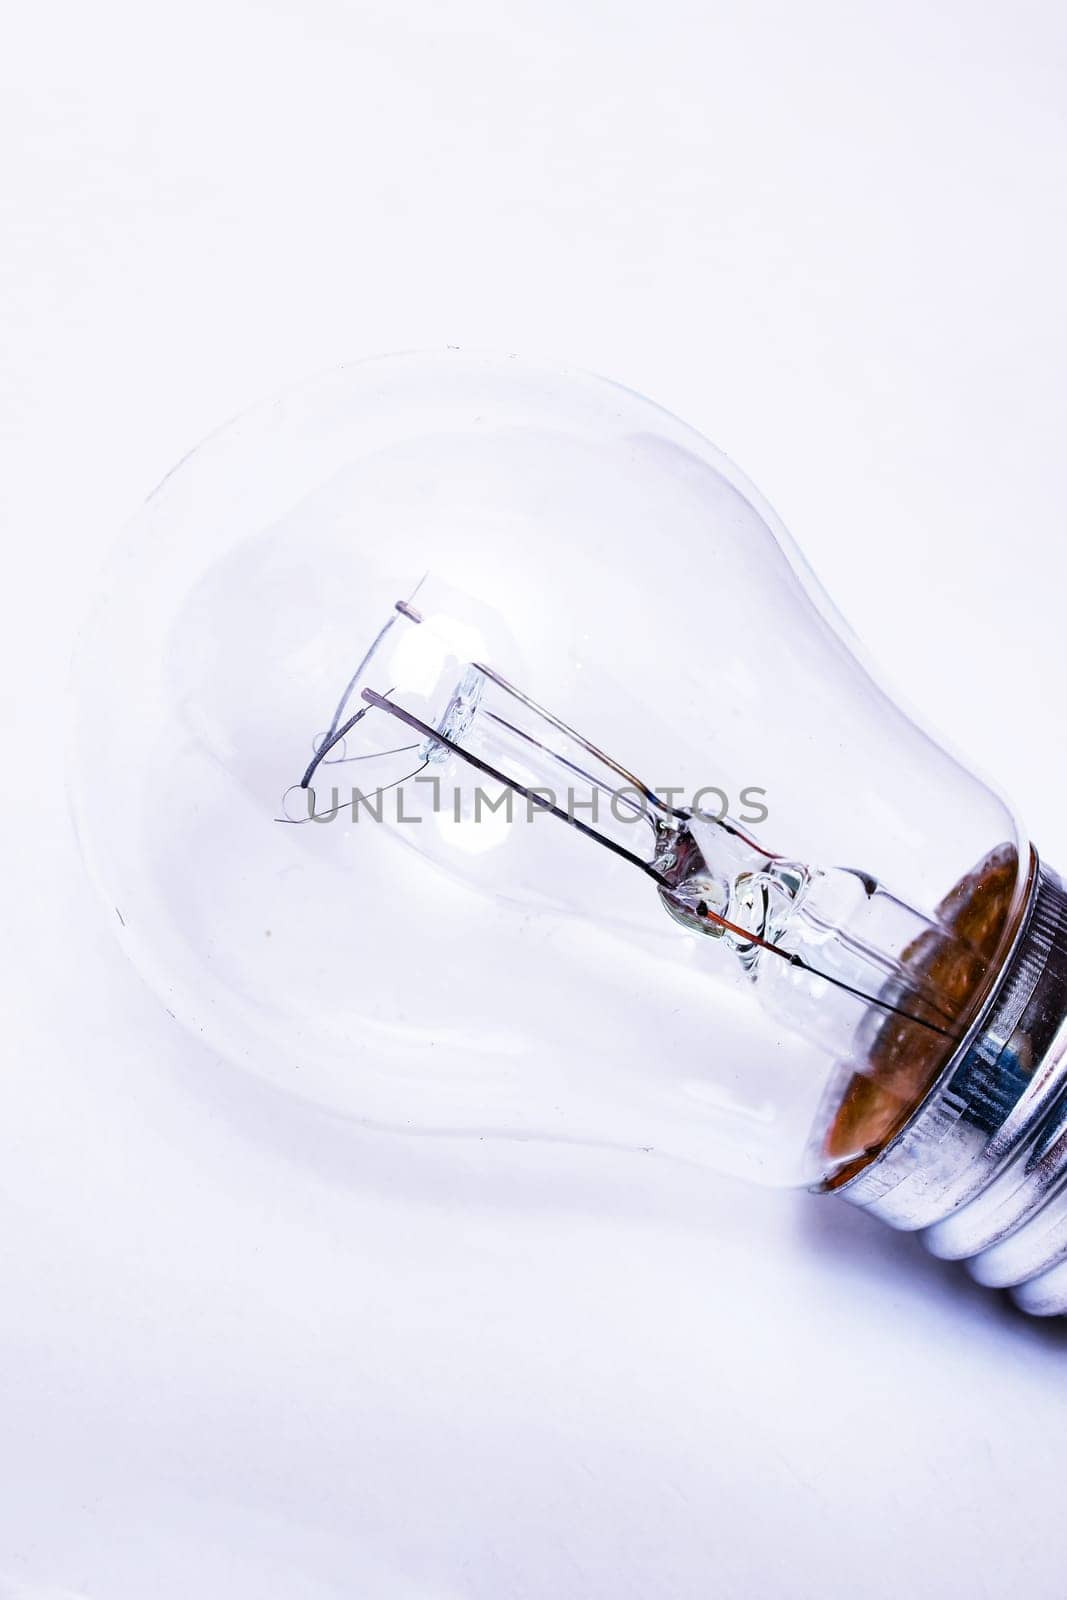 Old light bulb on a gray background by Vera1703